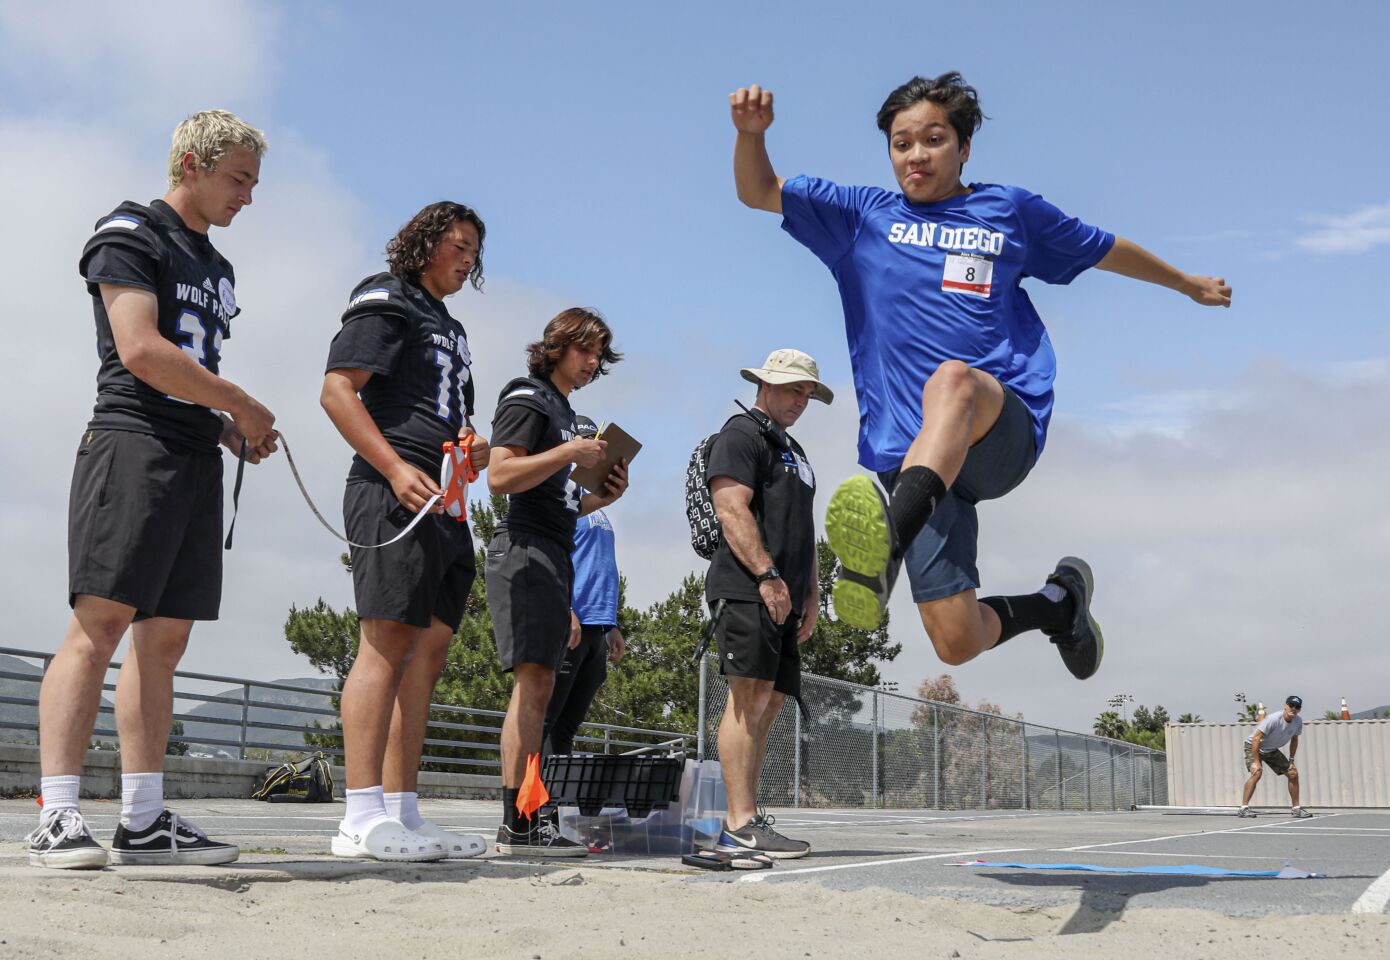 Alex Rowley, 14, competes in the long jump at the Special Olympics Southern California’s spring games at West Hills High School in Santee, CA on Saturday, May 20, 2023.